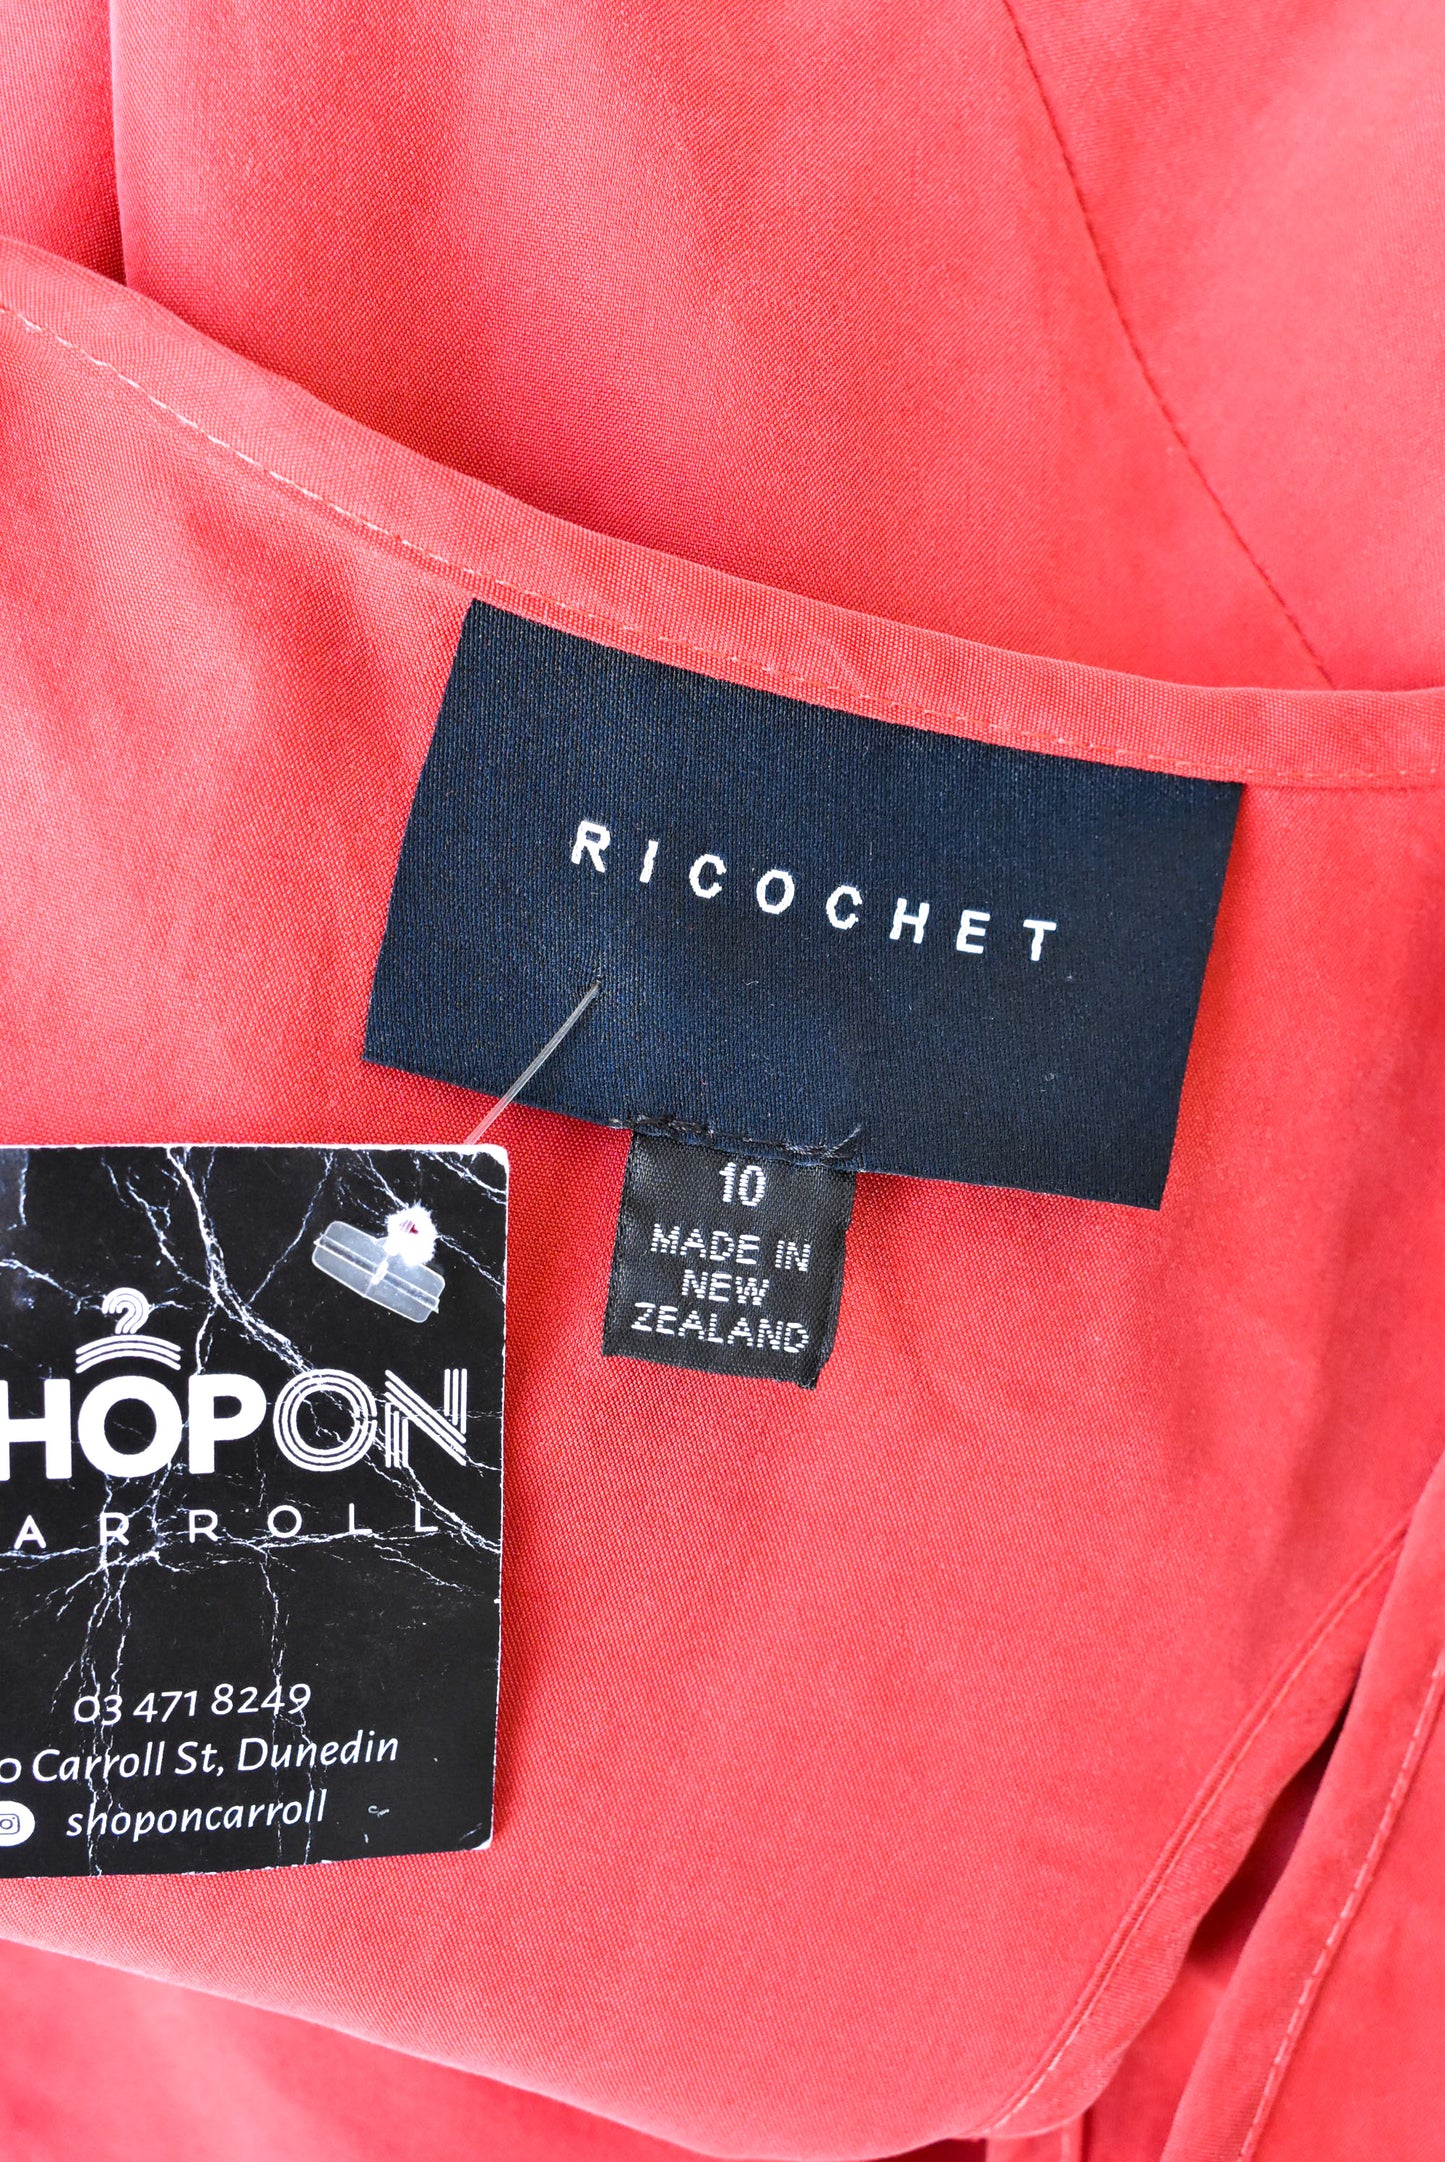 Ricochet red dress with pockets, 10